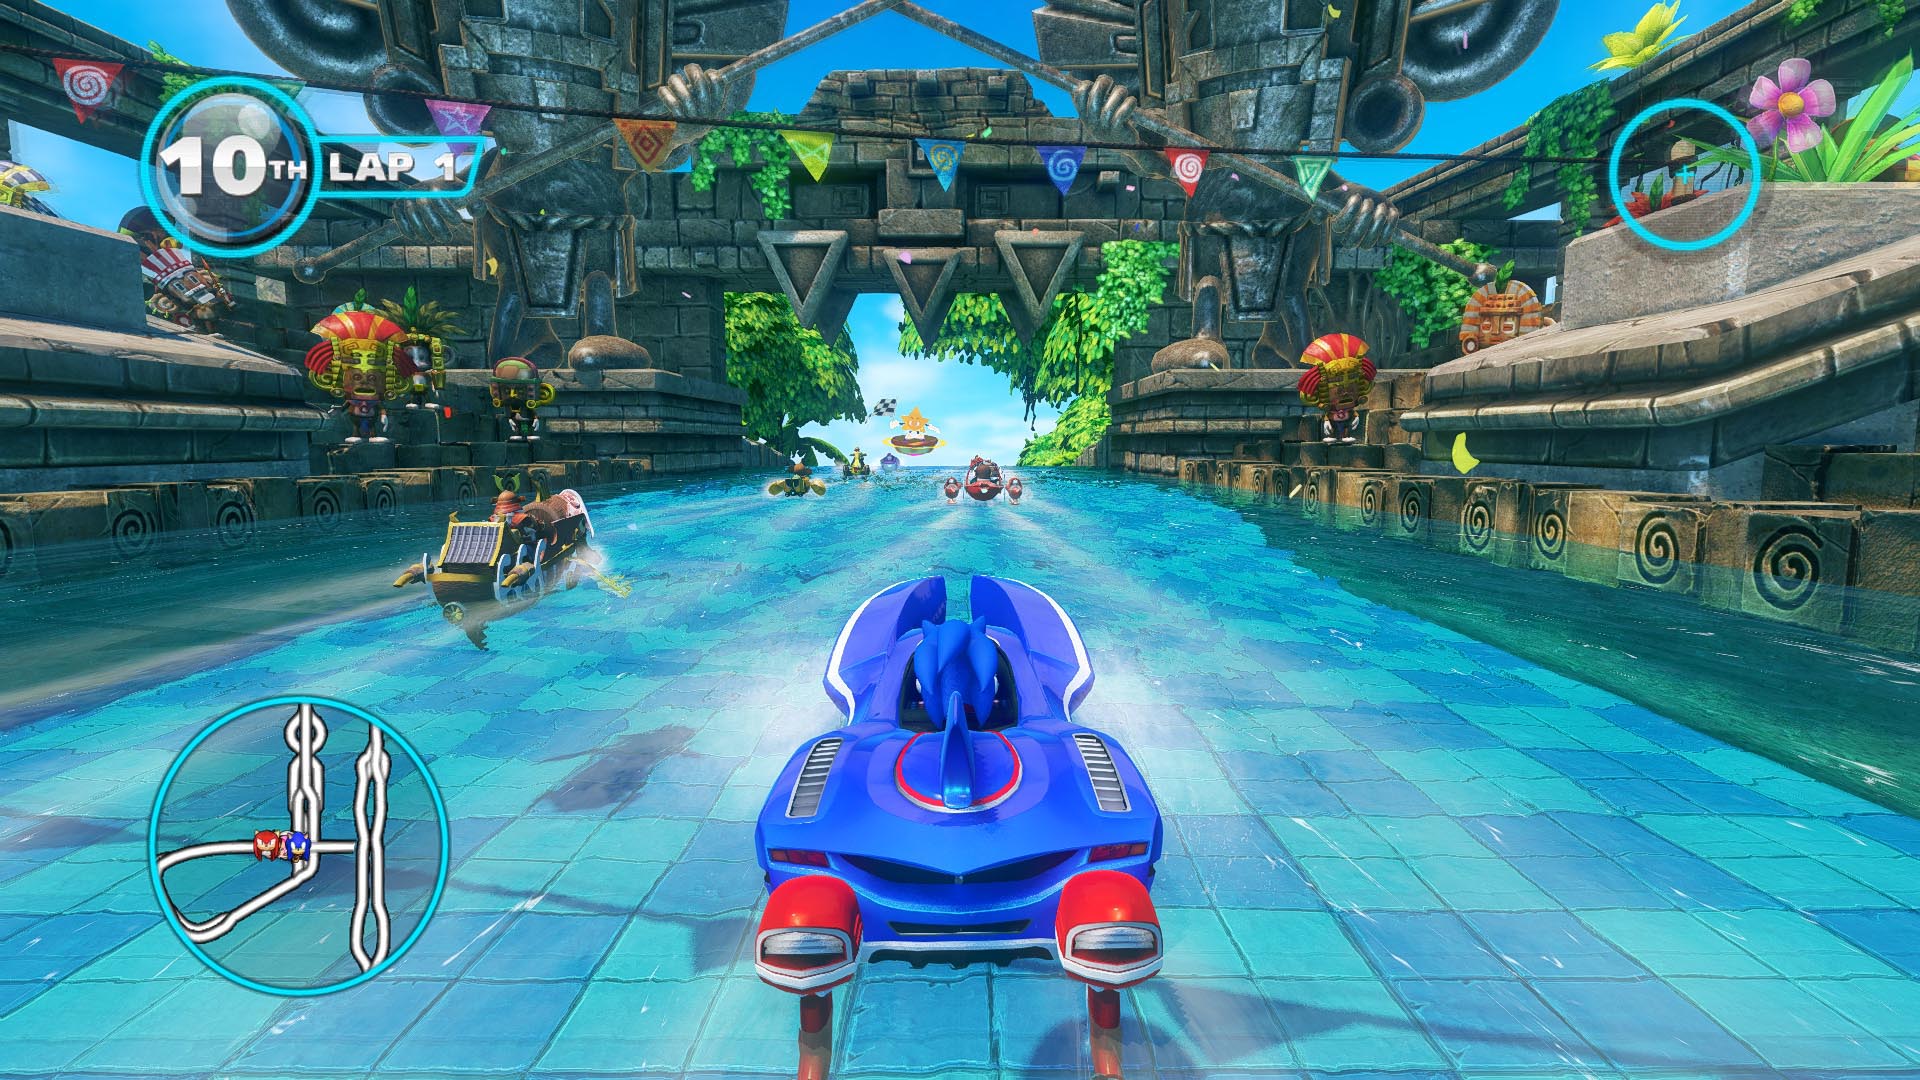 Love <i>Mario Kart </i>but don’t have a Nintendo console? This is <i>the</i> multiplatform, multiplayer game, with support for online <i>and</i> local multiplayer on all platforms. And you’re racing vehicles that transform between car, boat, and plane modes, all within the same race. | <b>For:</b> PC, Wii U, PS3, Xbox 360, 3DS, Vita, iOS, Android